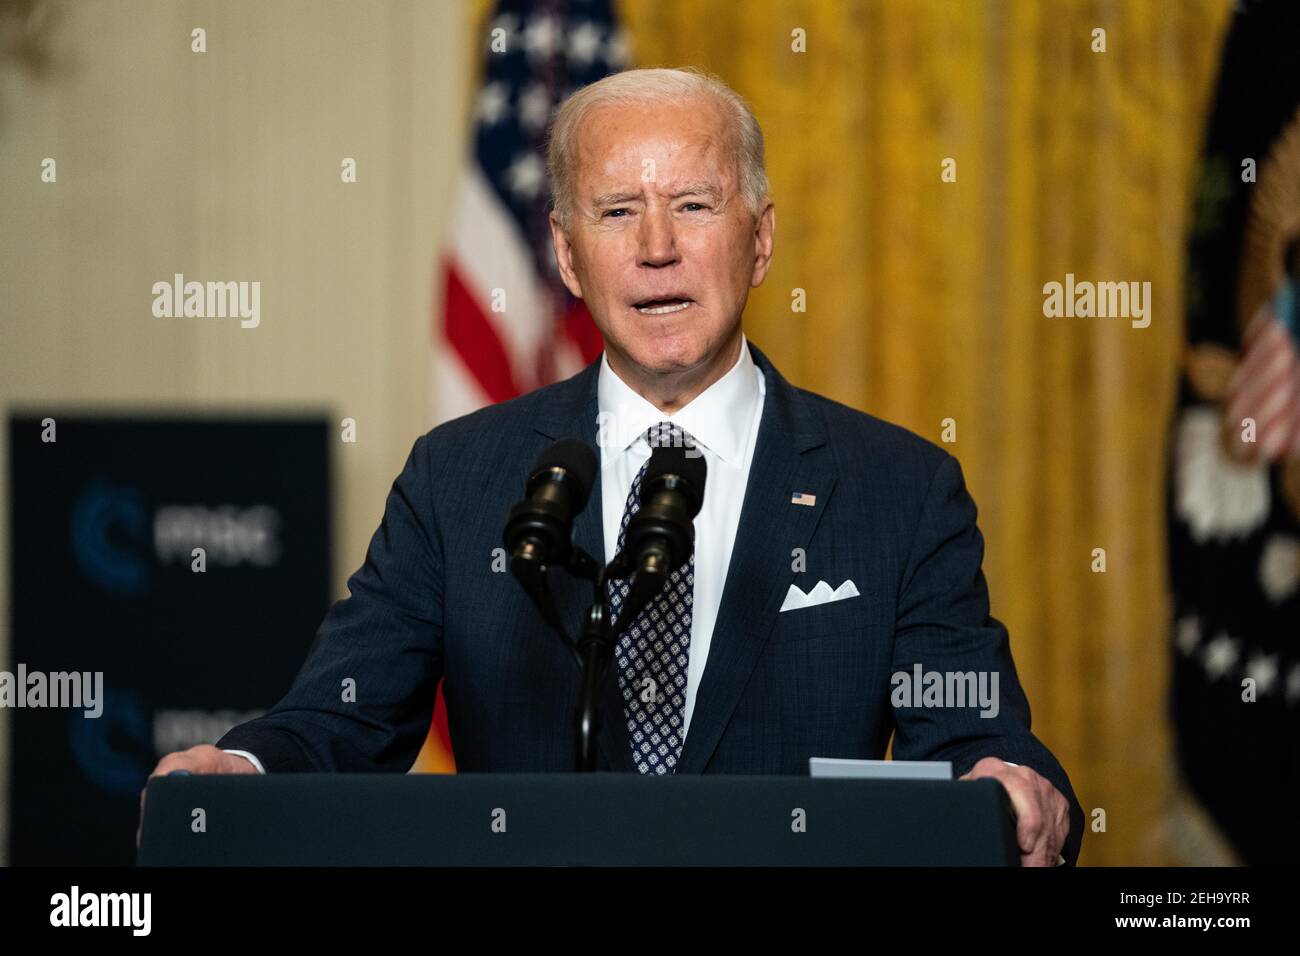 United States President Joe Biden delivers remarks at a virtual event hosted by the Munich Security Conference in the East Room of the White House on February 19, 2021 in Washington, DC. In his remarks, President Biden stressed the United States' commitment to NATO after four years of the Trump administration undermining the alliance.Credit: Anna Moneymaker/Pool via CNP /MediaPunch Stock Photo